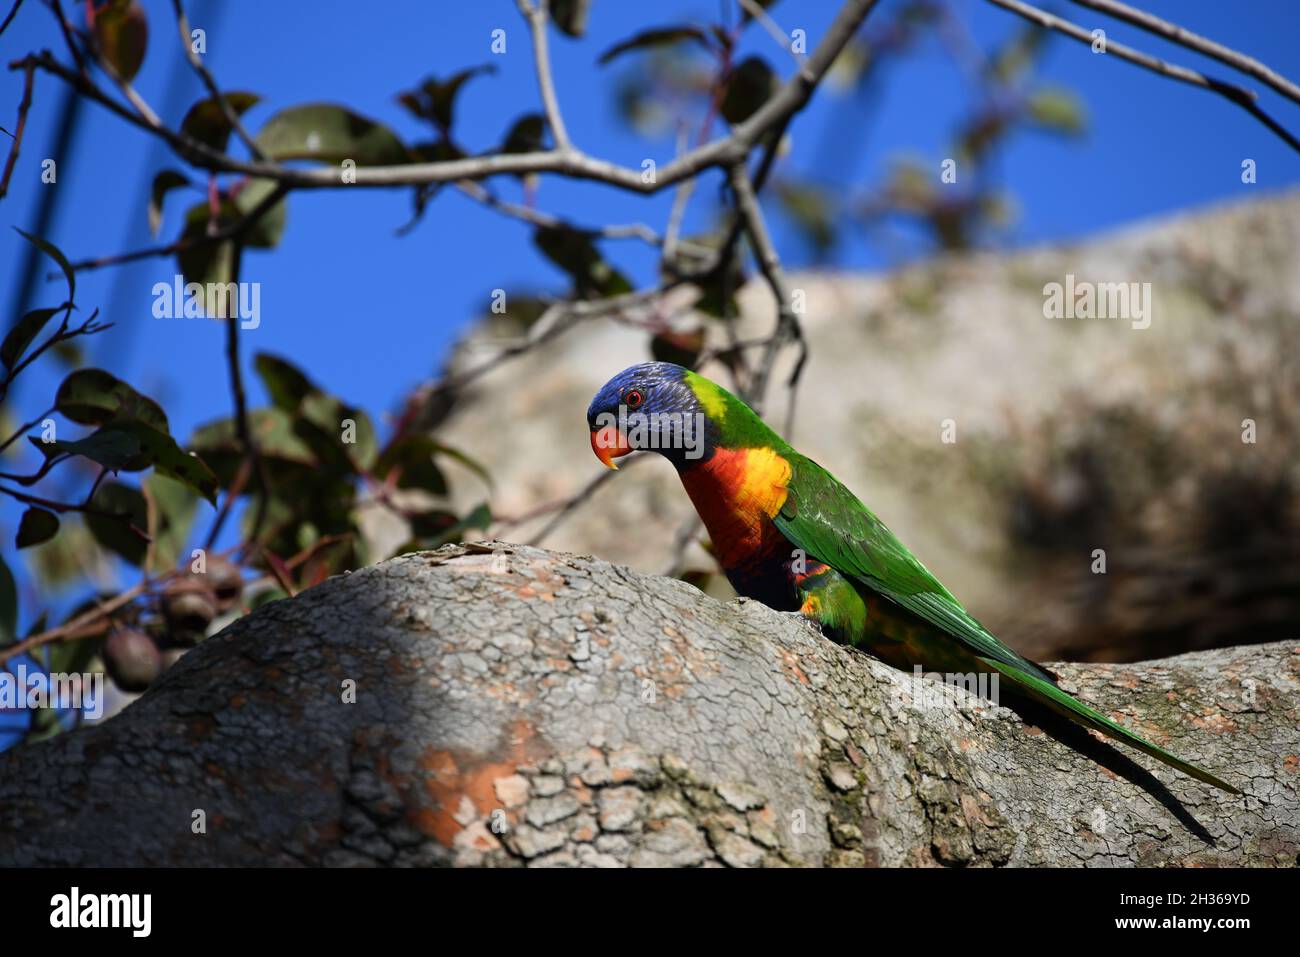 Slender rainbow lorikeet perched on a thick tree branch, its entire body illuminated by the sun Stock Photo